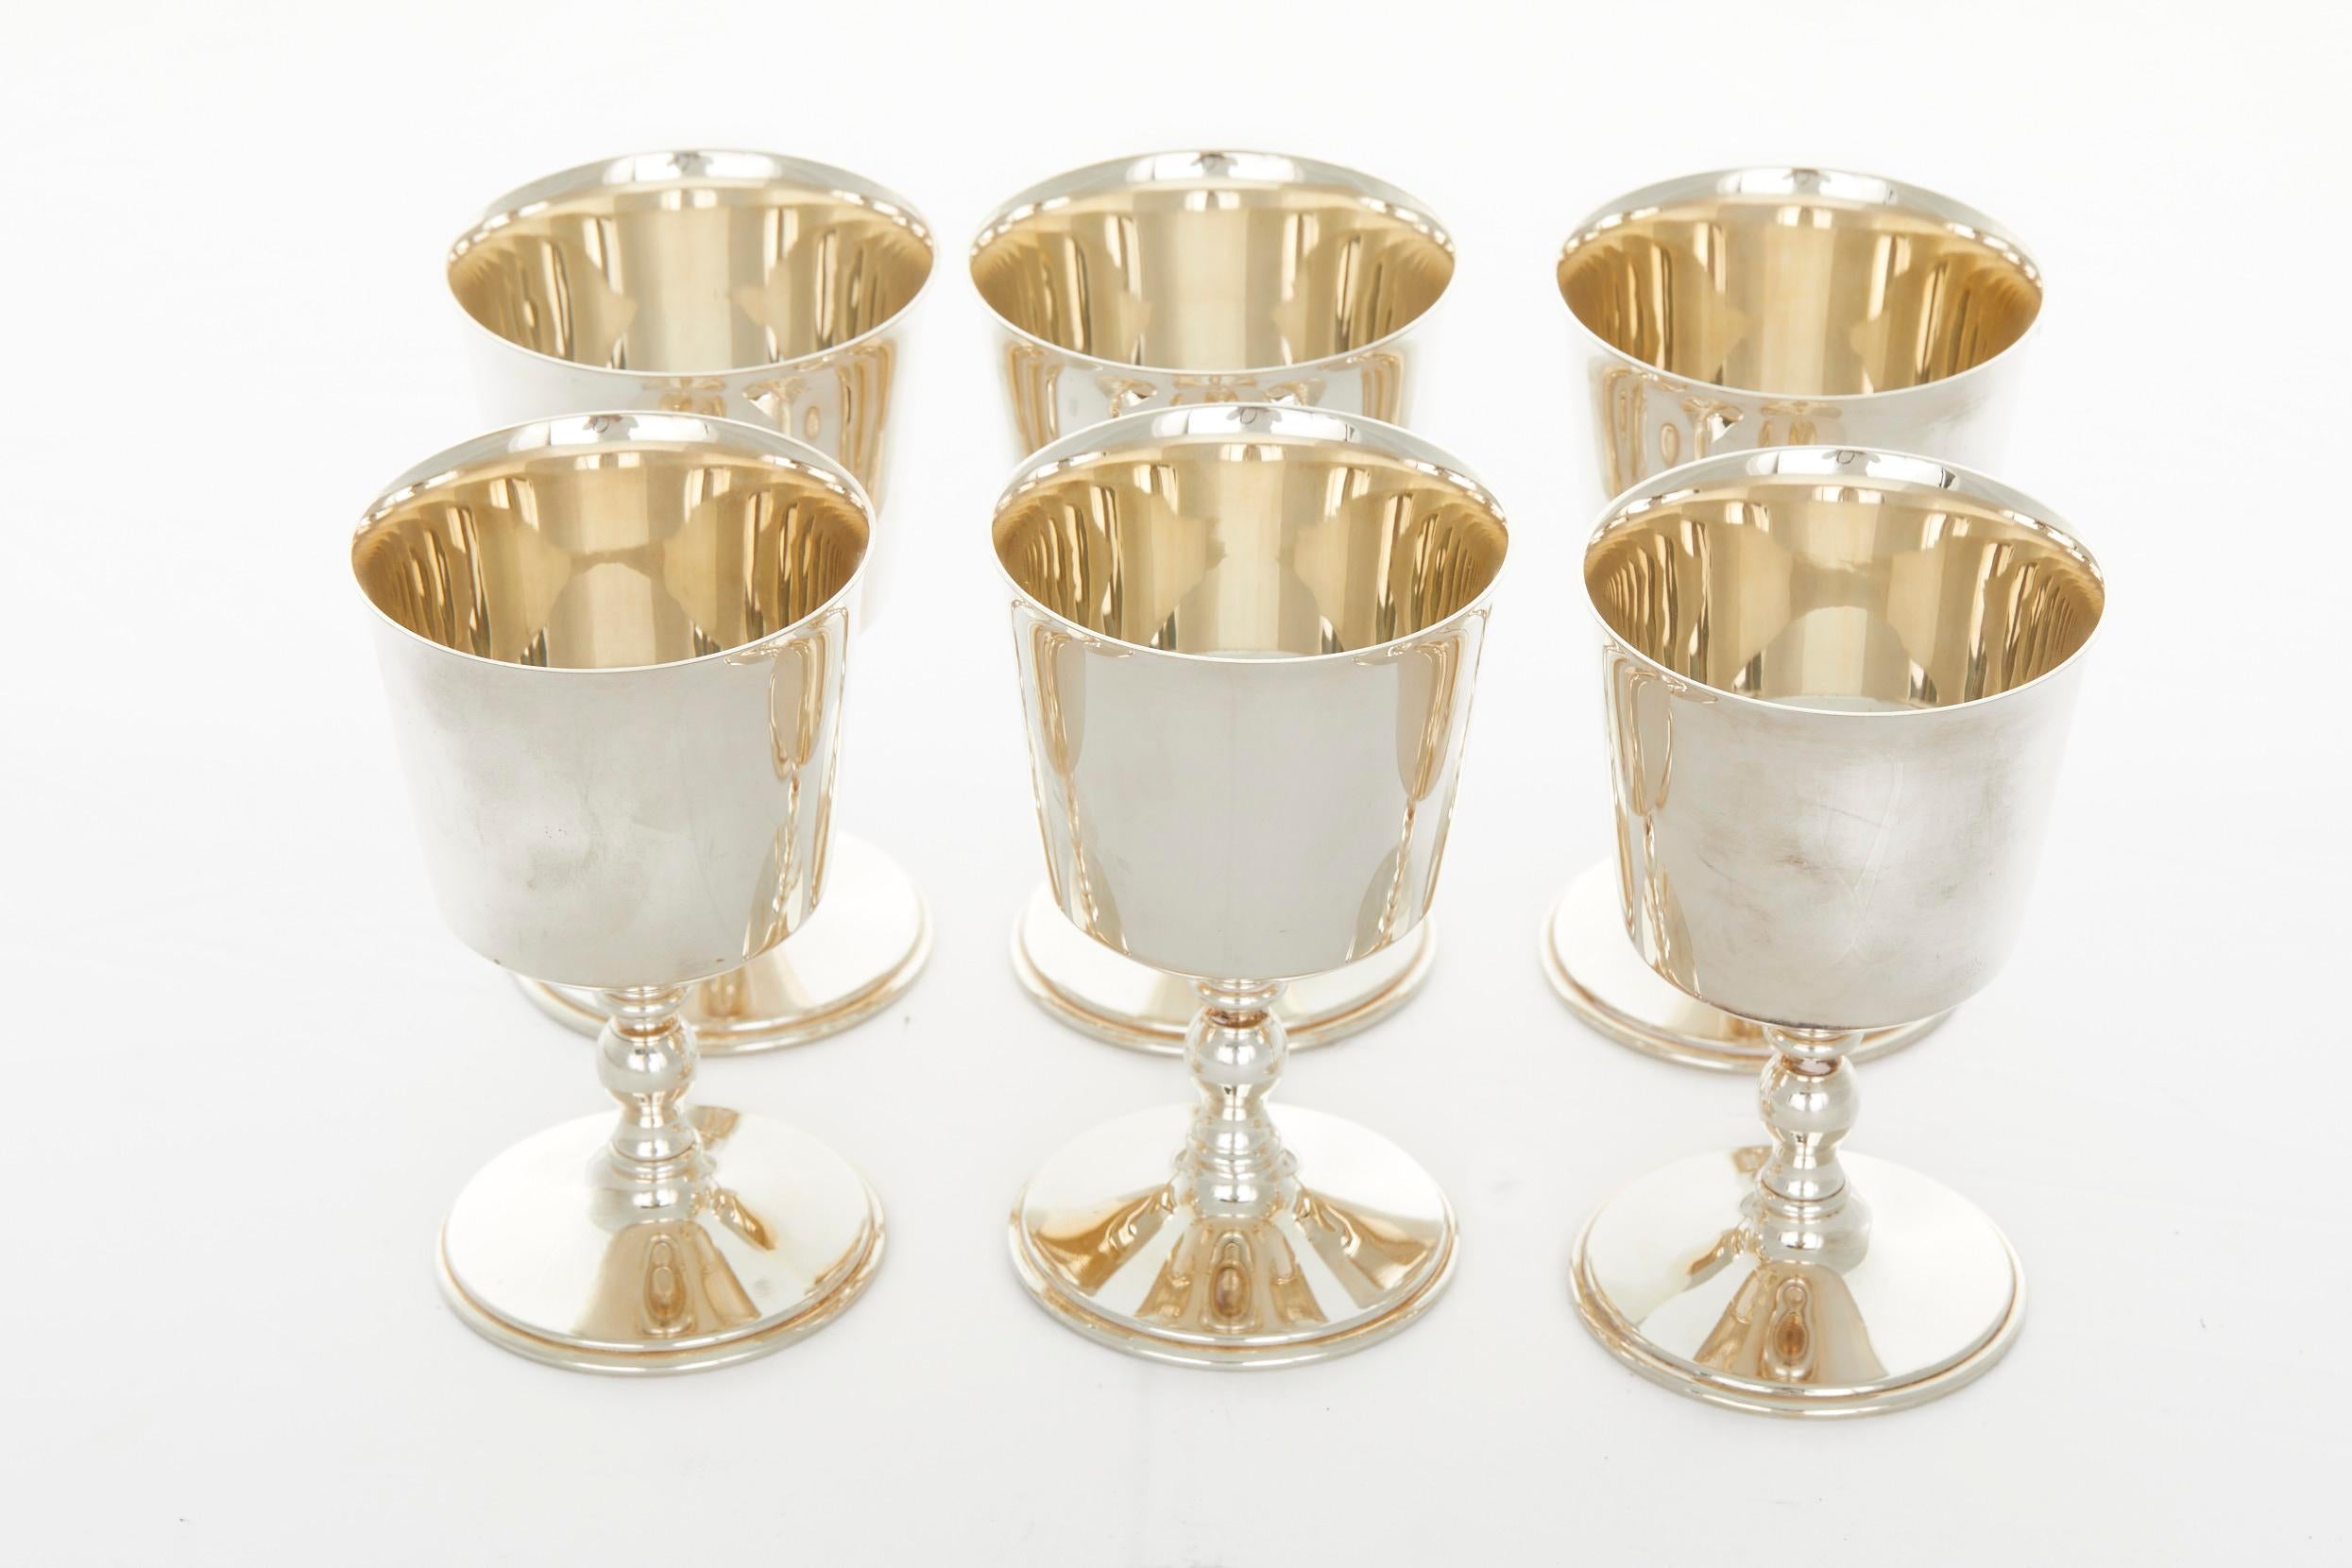 English silver plated Art Deco style barware / tableware drinking goblet service for six people. Each silver cup is in great condition. Minor wear. Maker's mark undersigned. Each cup measures 5.3 inches tall X 3.2 inches diameter.